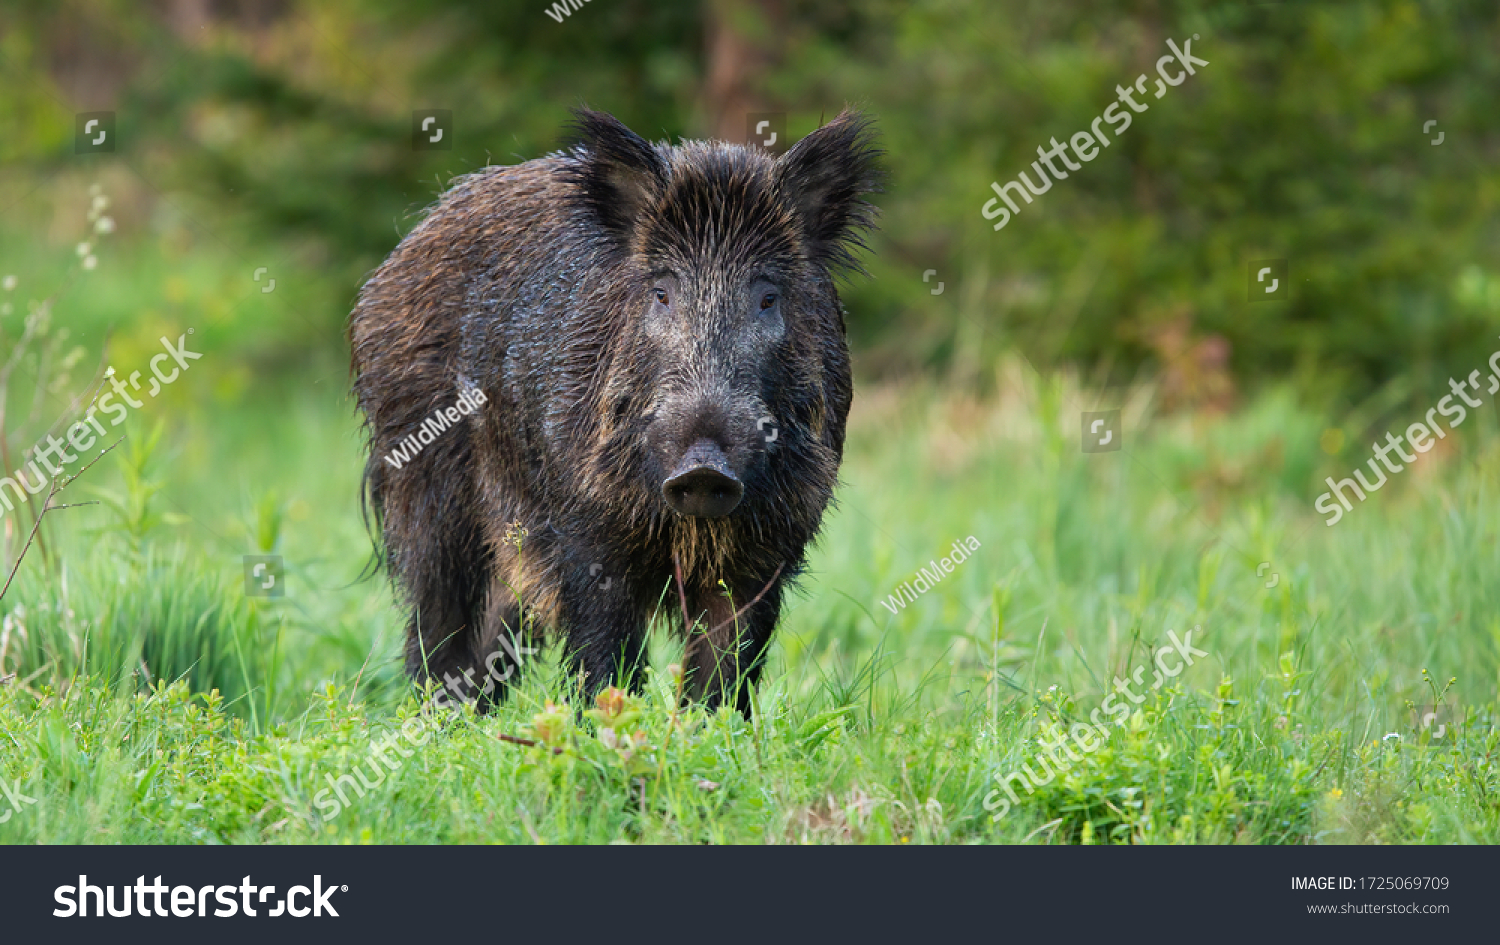 Majestic wild boar, sus scrofa, standing on the forest clearing and facing camera. Solitary massive animal in the wild nature. Cute adult hog on the pasture. Curious and harmless animal in open space. #1725069709